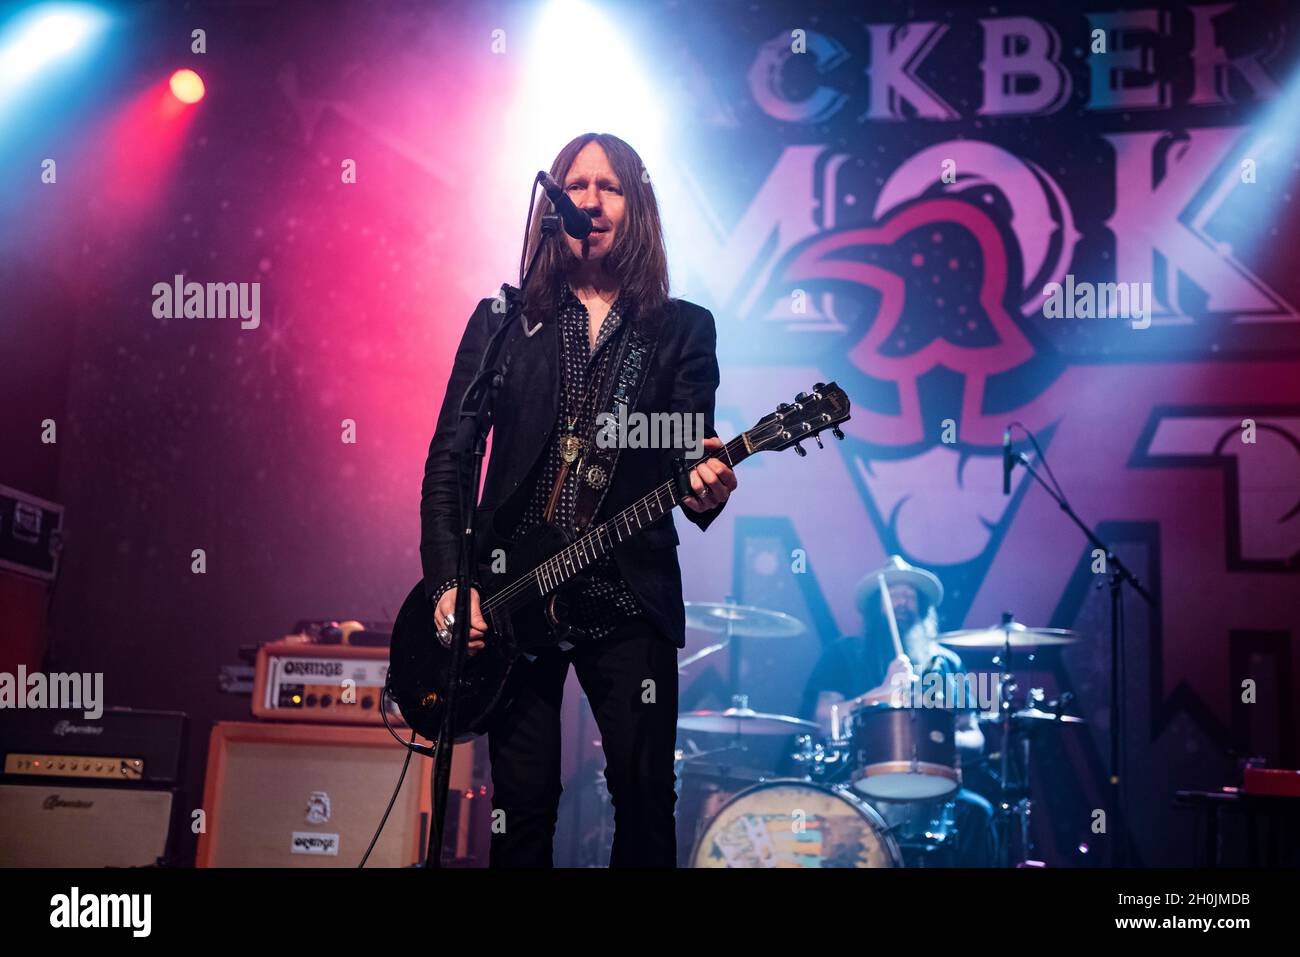 Blackberry Smoke (vocalist/guitarist Charlie Starr) live in concert at Birmingham O2 Academy, 7th October 2017. Live Music Photography. Stock Photo